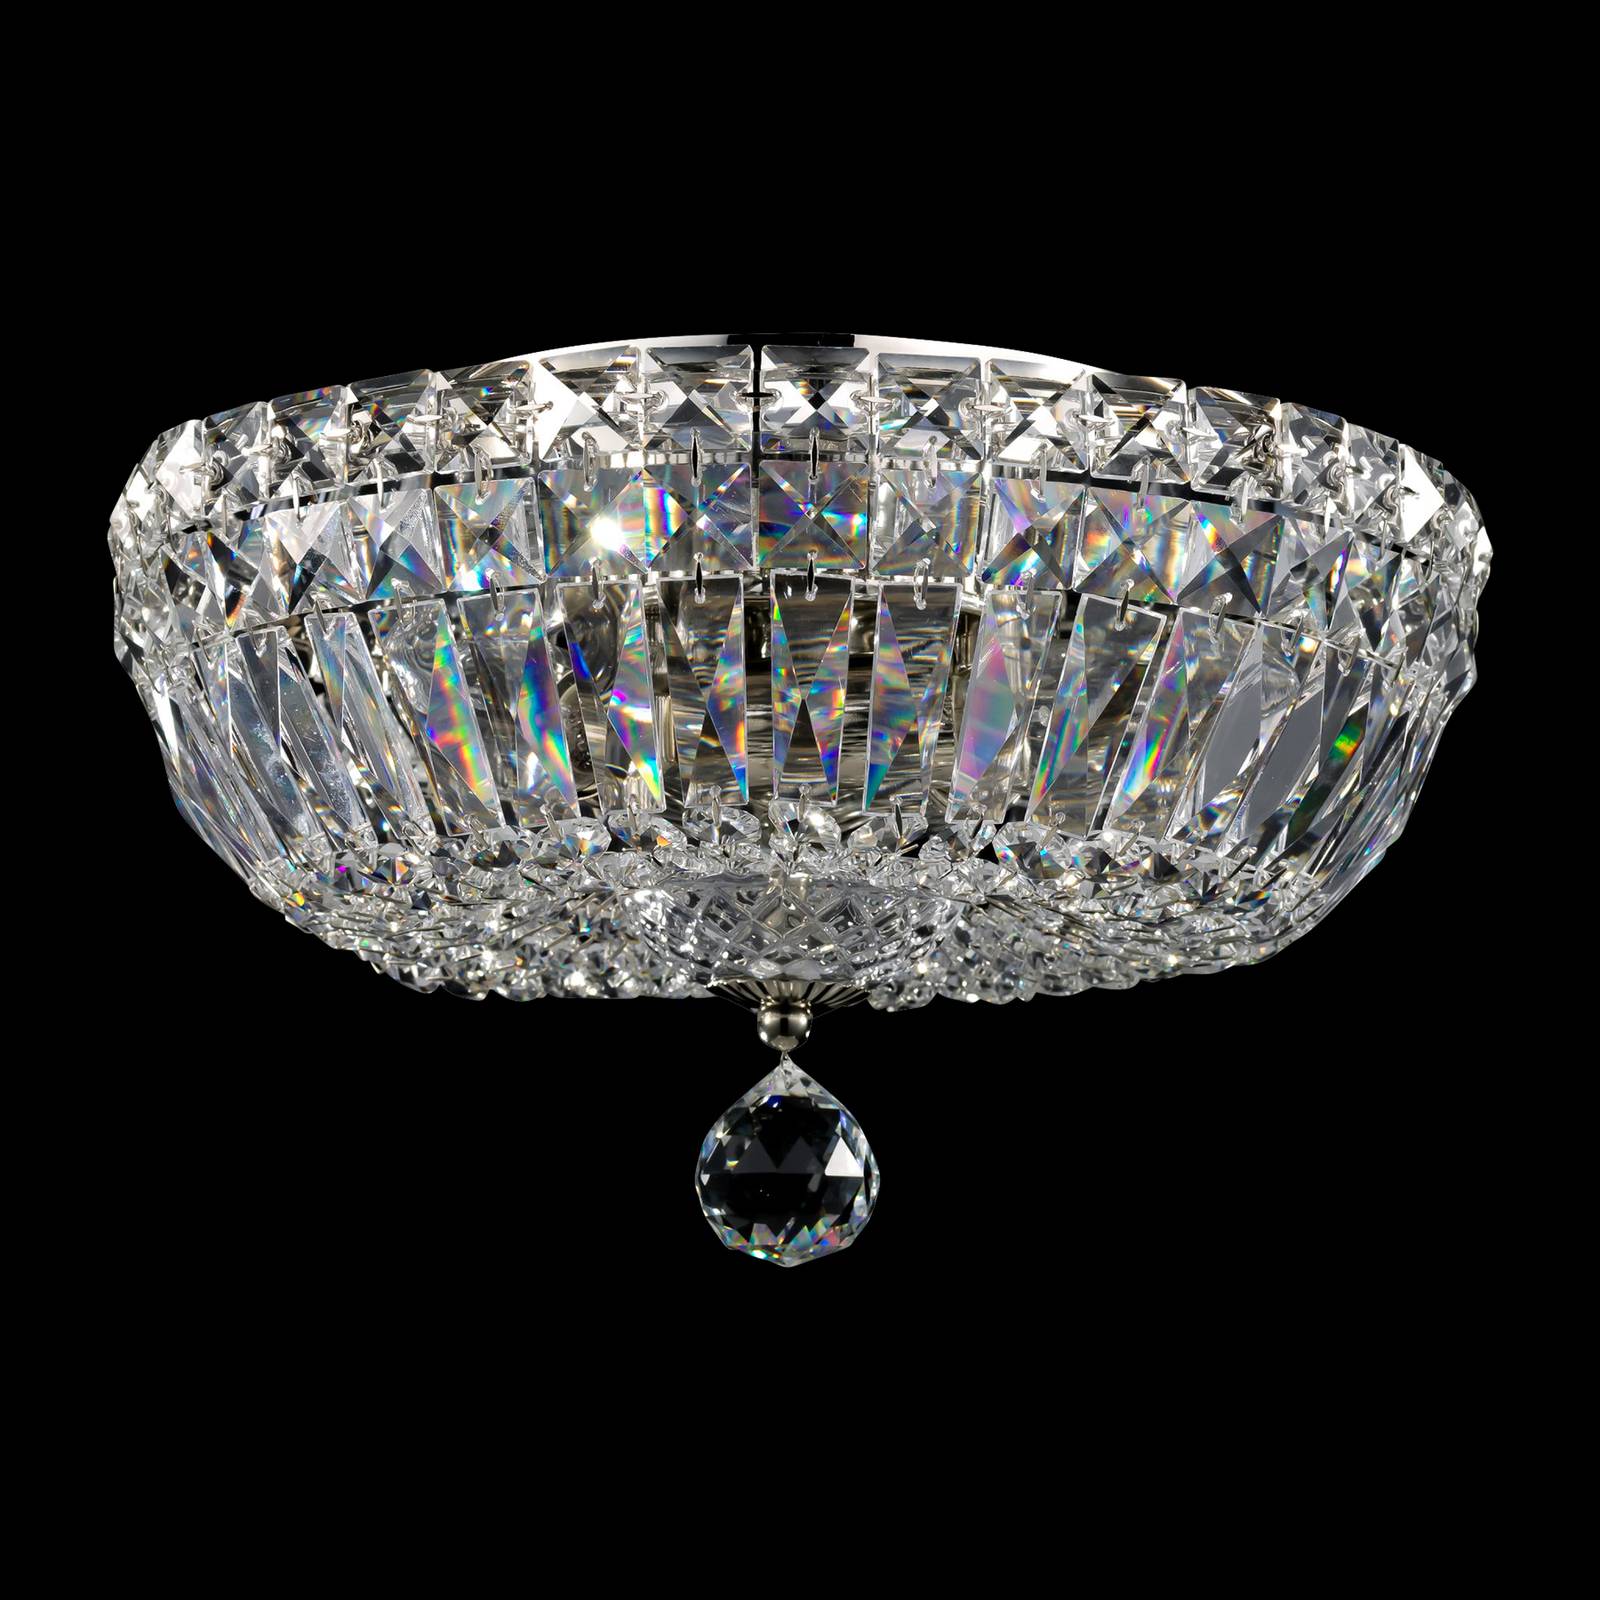 Photos - Chandelier / Lamp Maytoni Basfor ceiling light round, crystals 